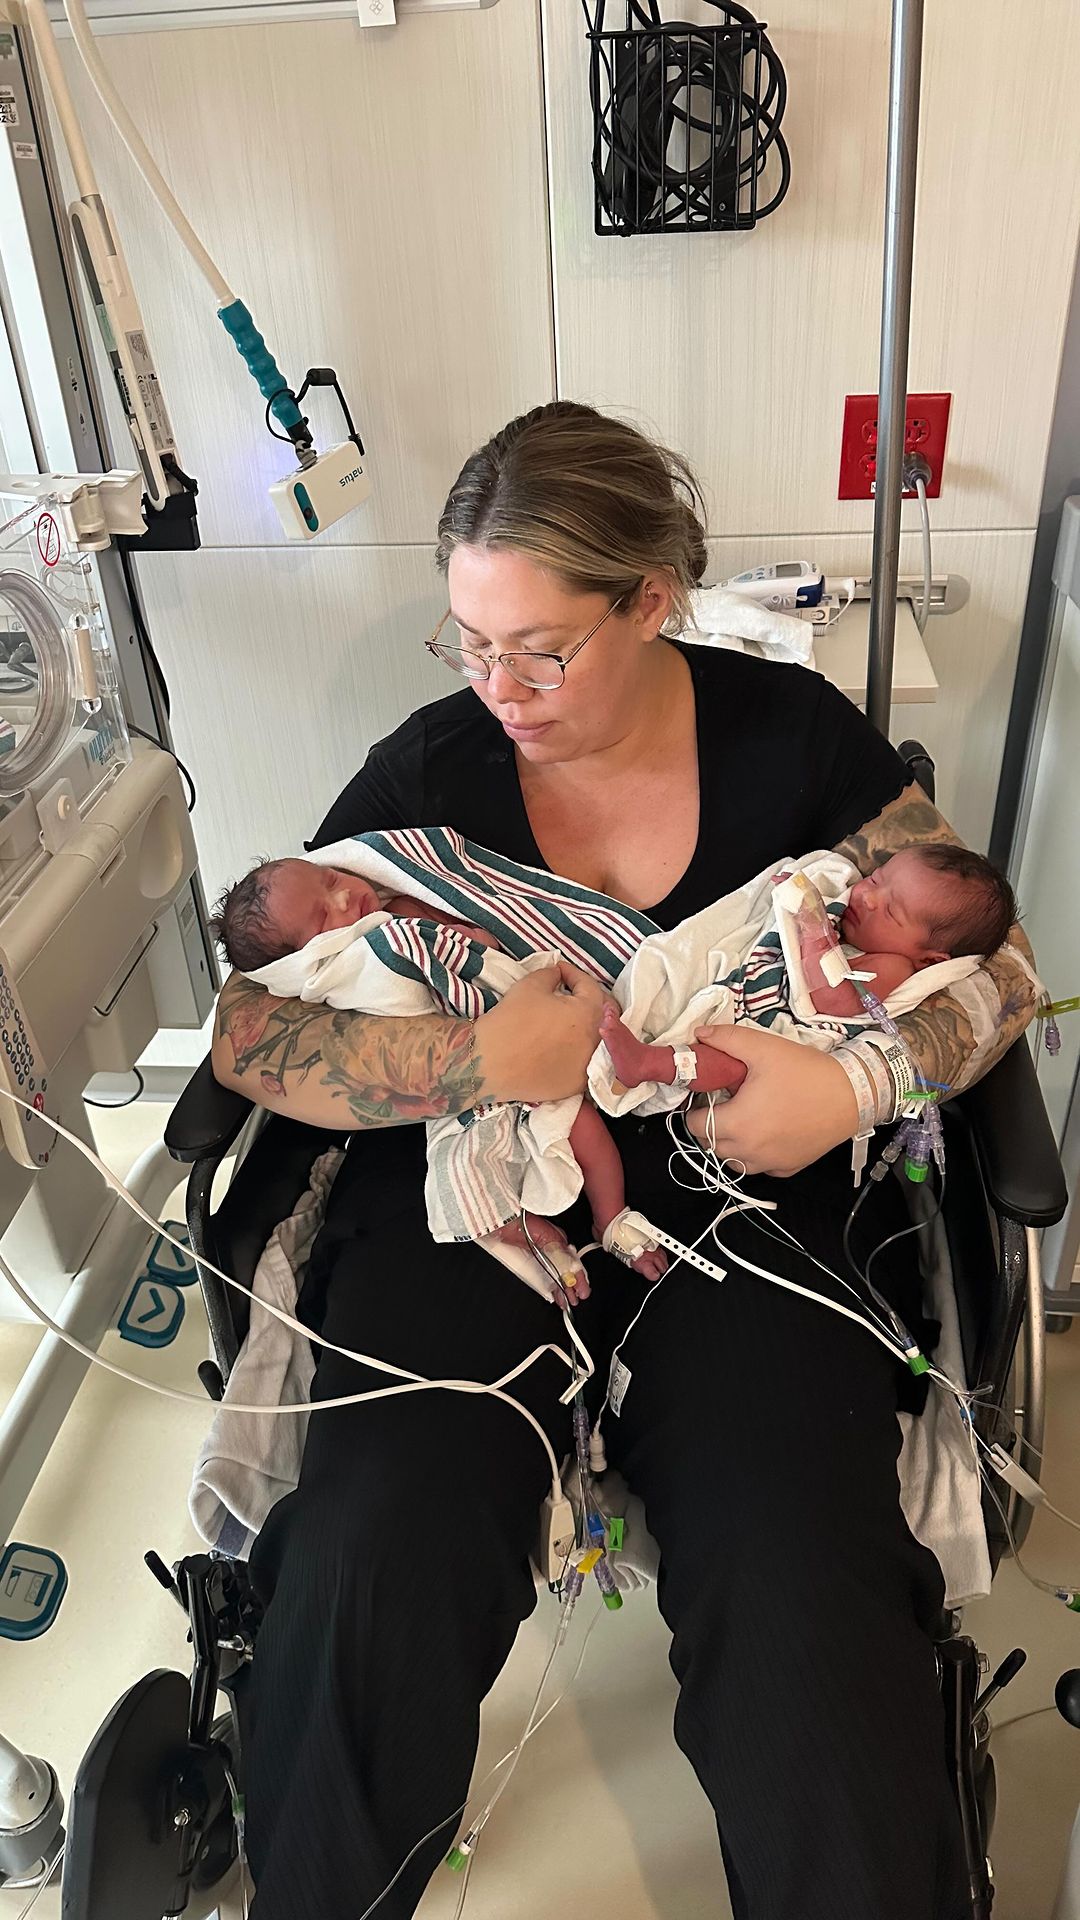 The Teen Mom alum welcomed twins in November, though she didn't confirm the news until last month